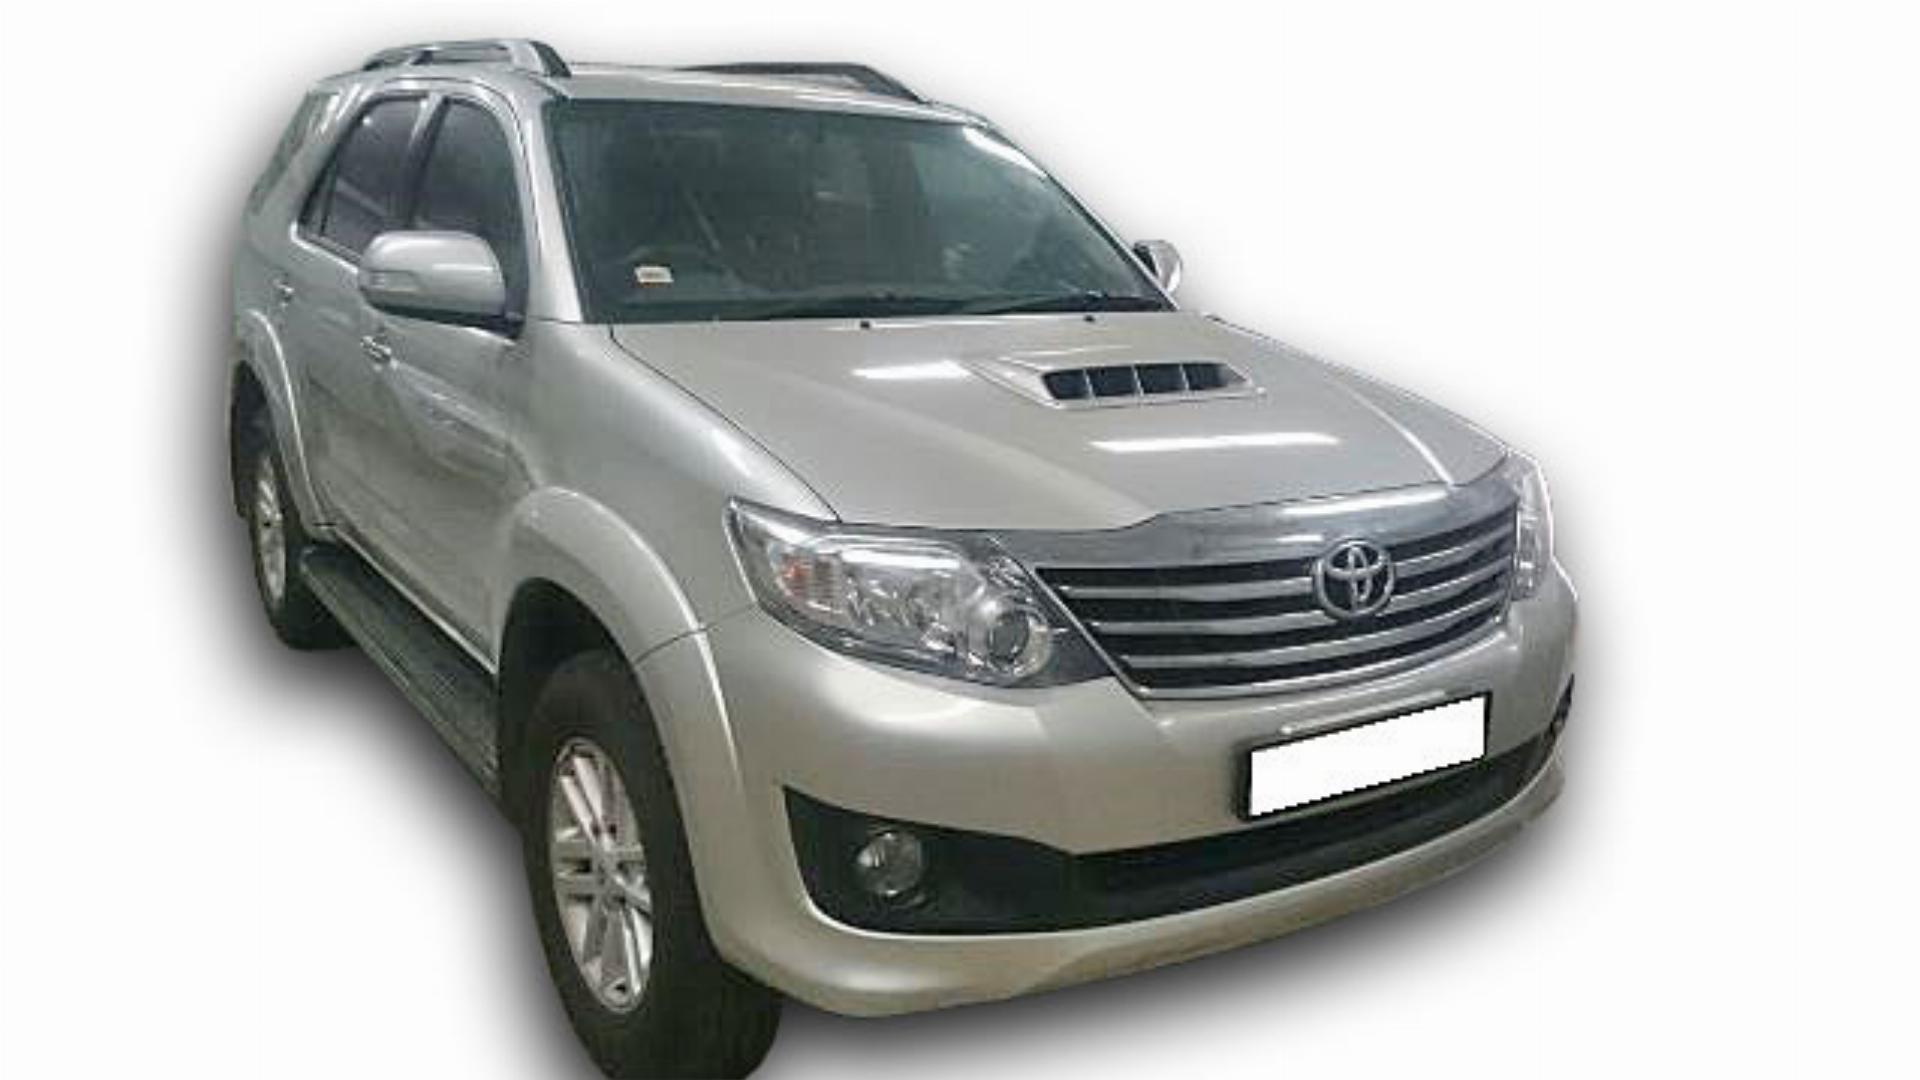 Repossessed Toyota Fortuner 2.5D-4D RB A/T 2014 on auction - MC34783